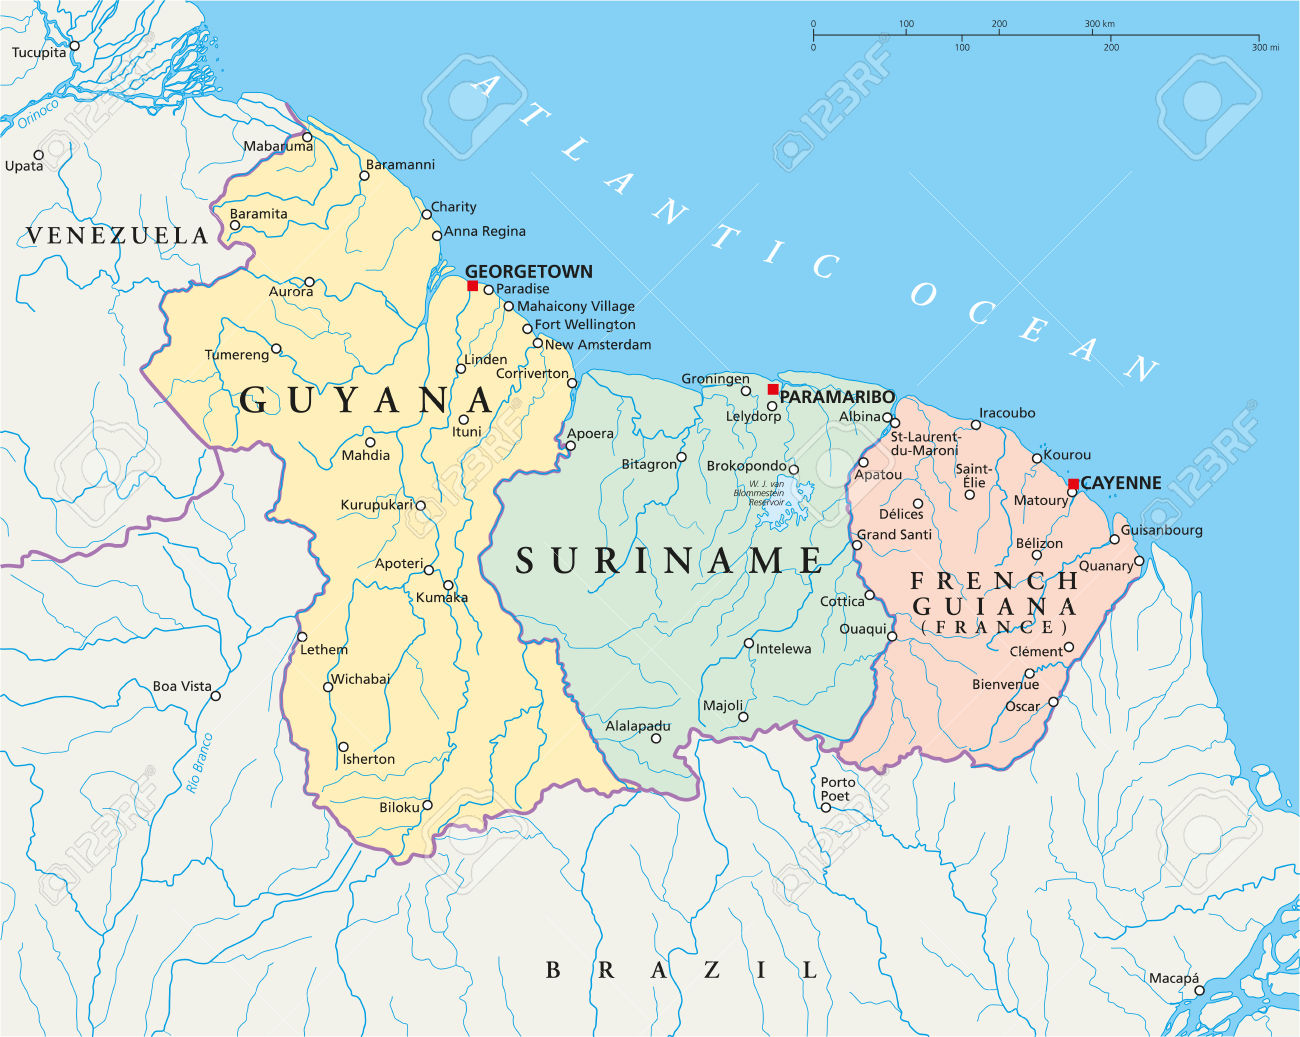 Political Map of French Guiana, Guyana and Suriname